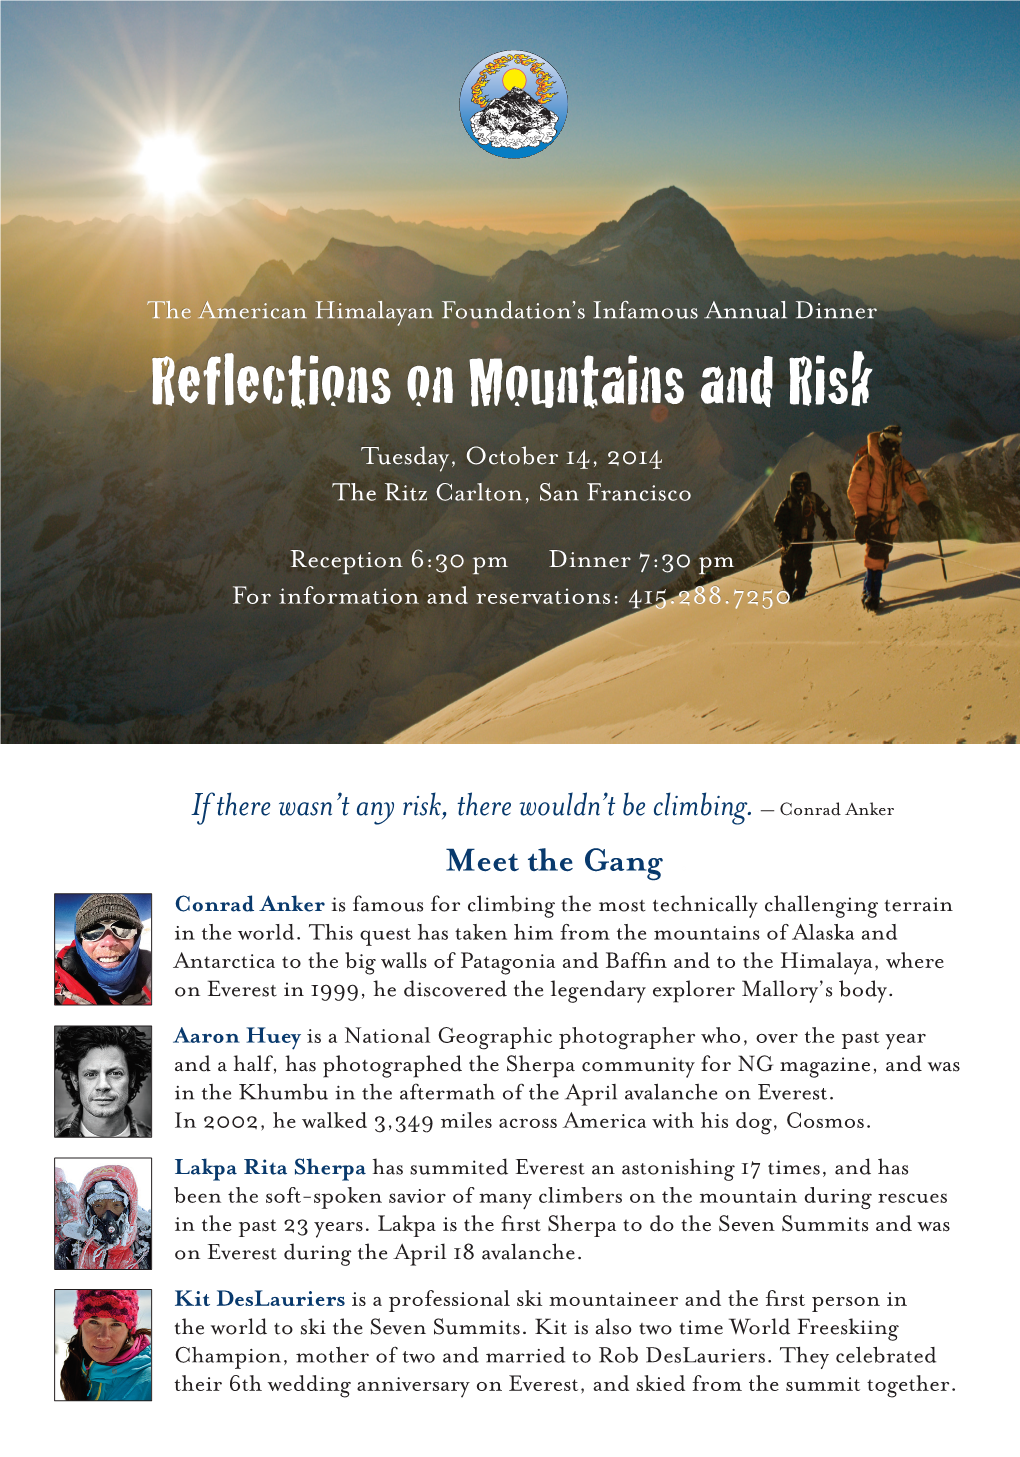 Reflections on Mountains and Risk Tuesday, October 14, 2014 the Ritz Carlton, San Francisco